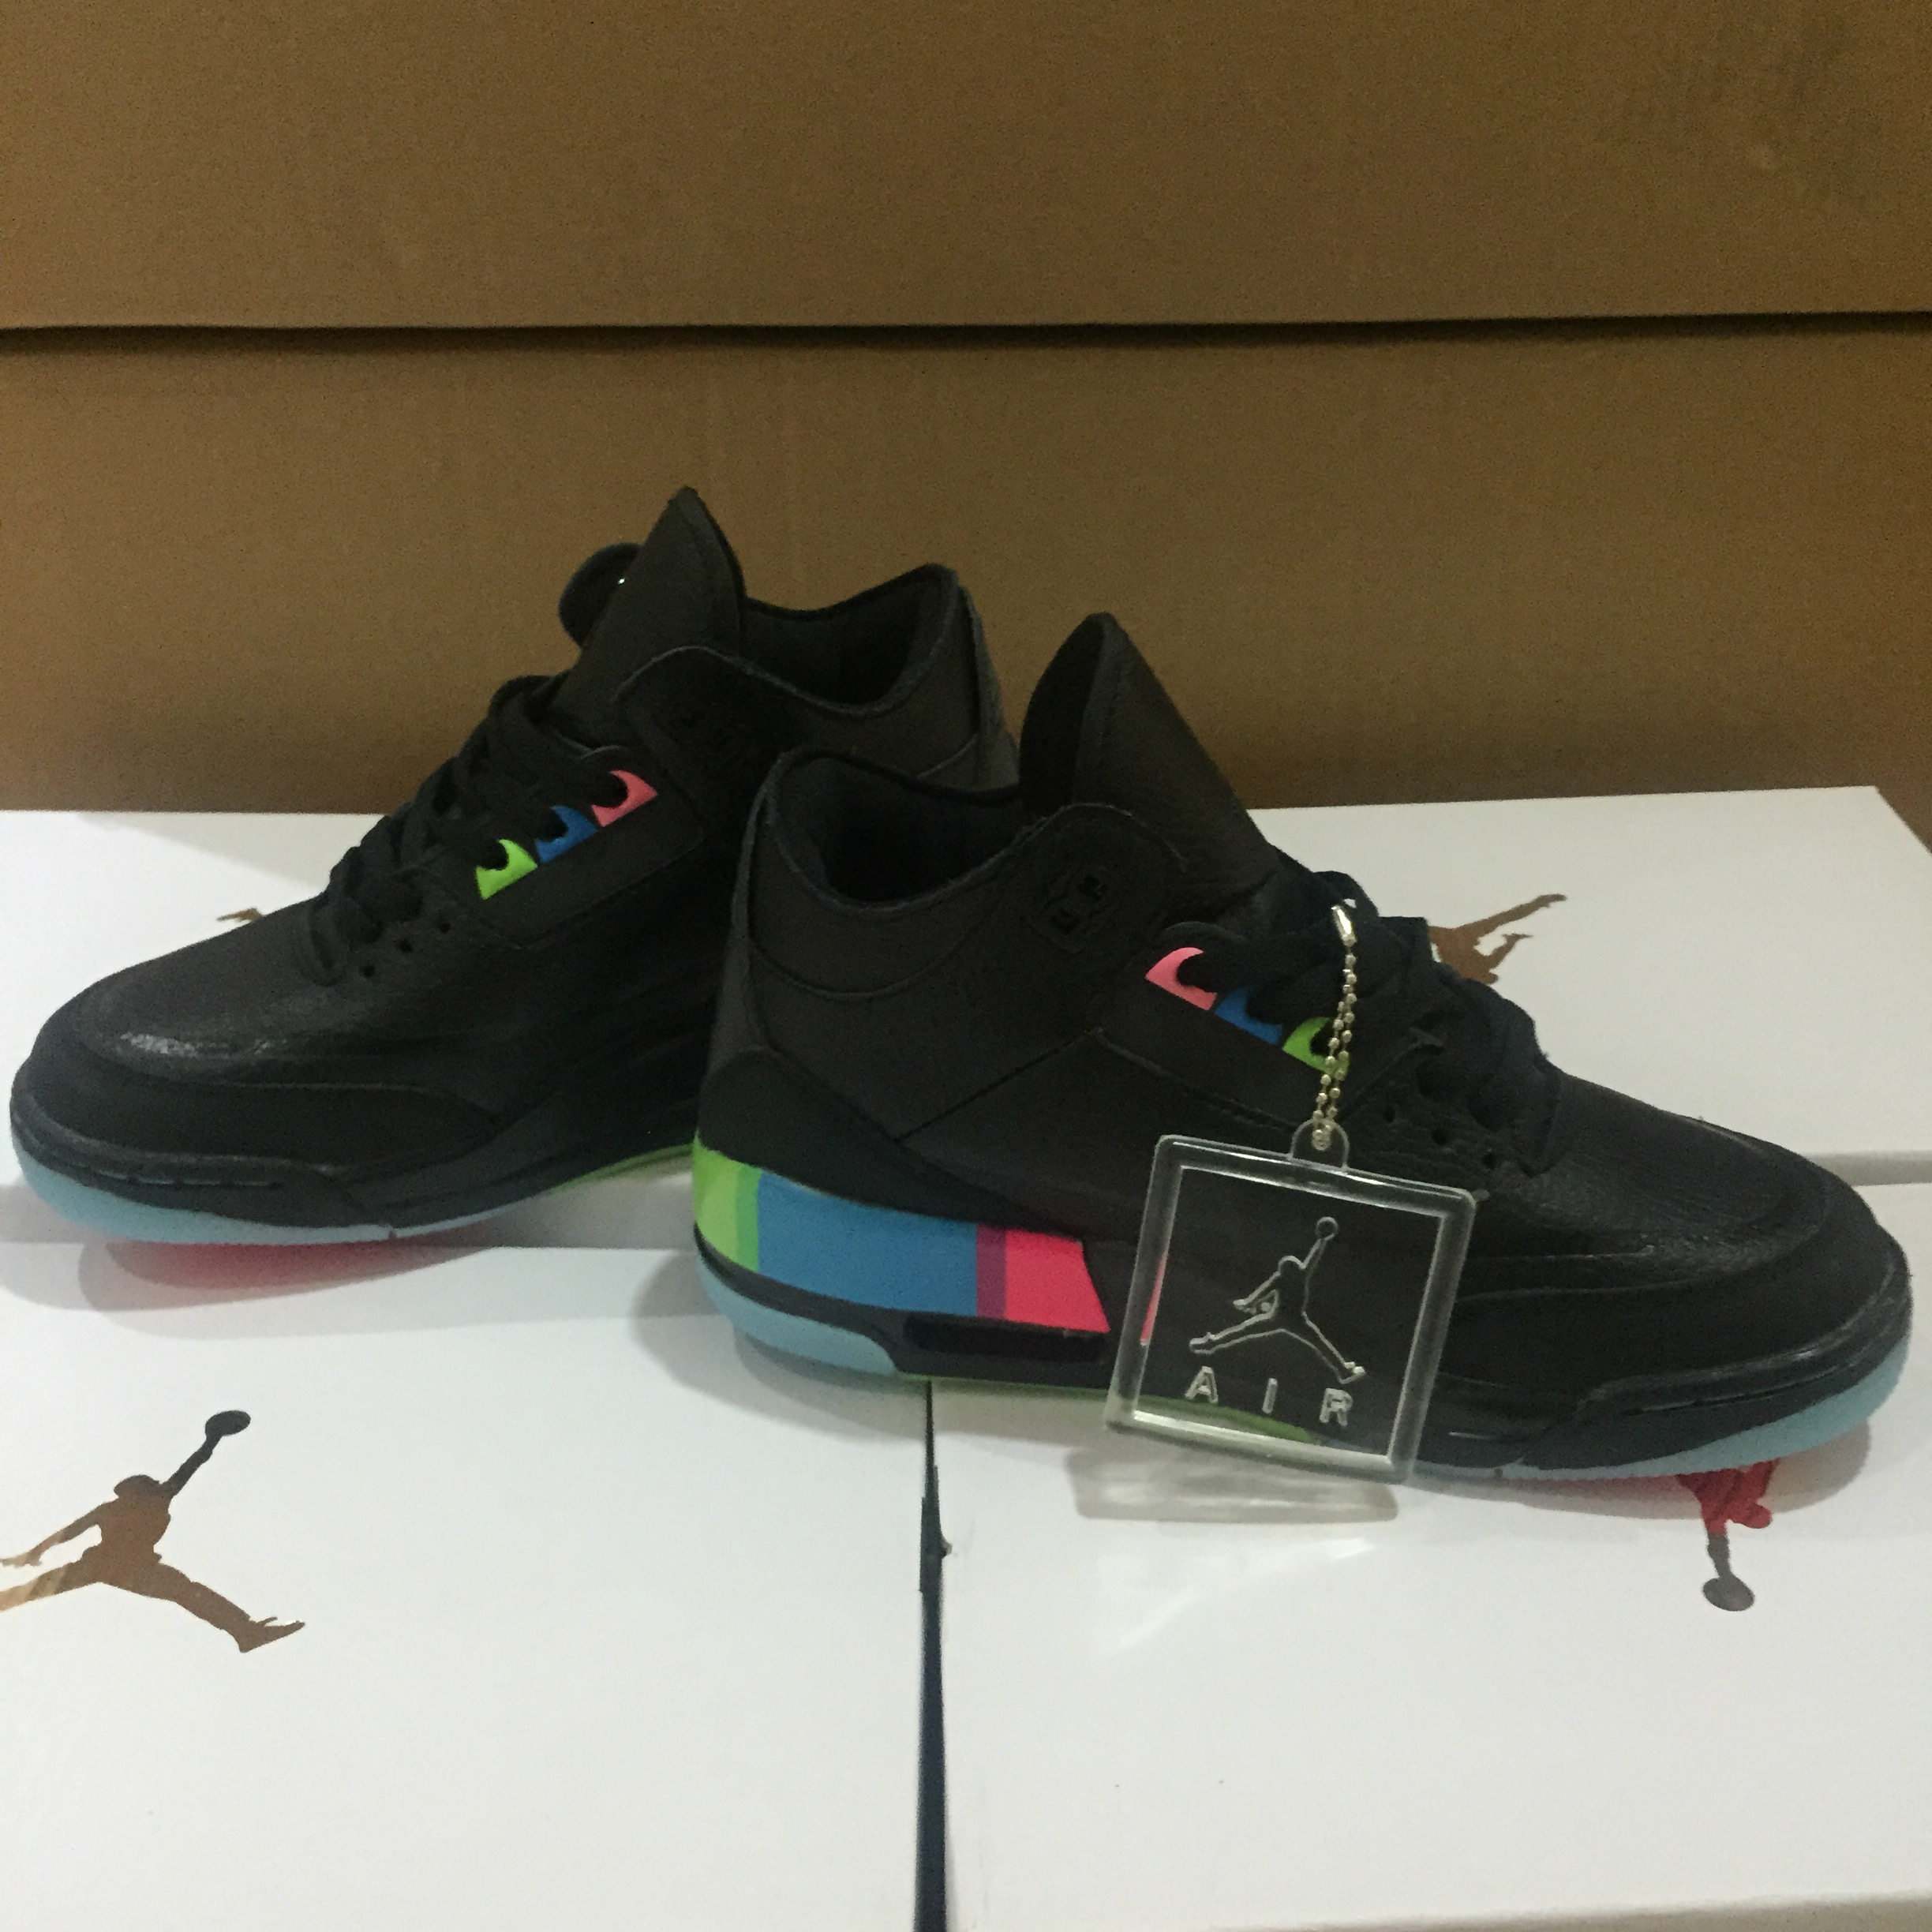 New Air Jordan 3 Black Rianbow Shoes - Click Image to Close